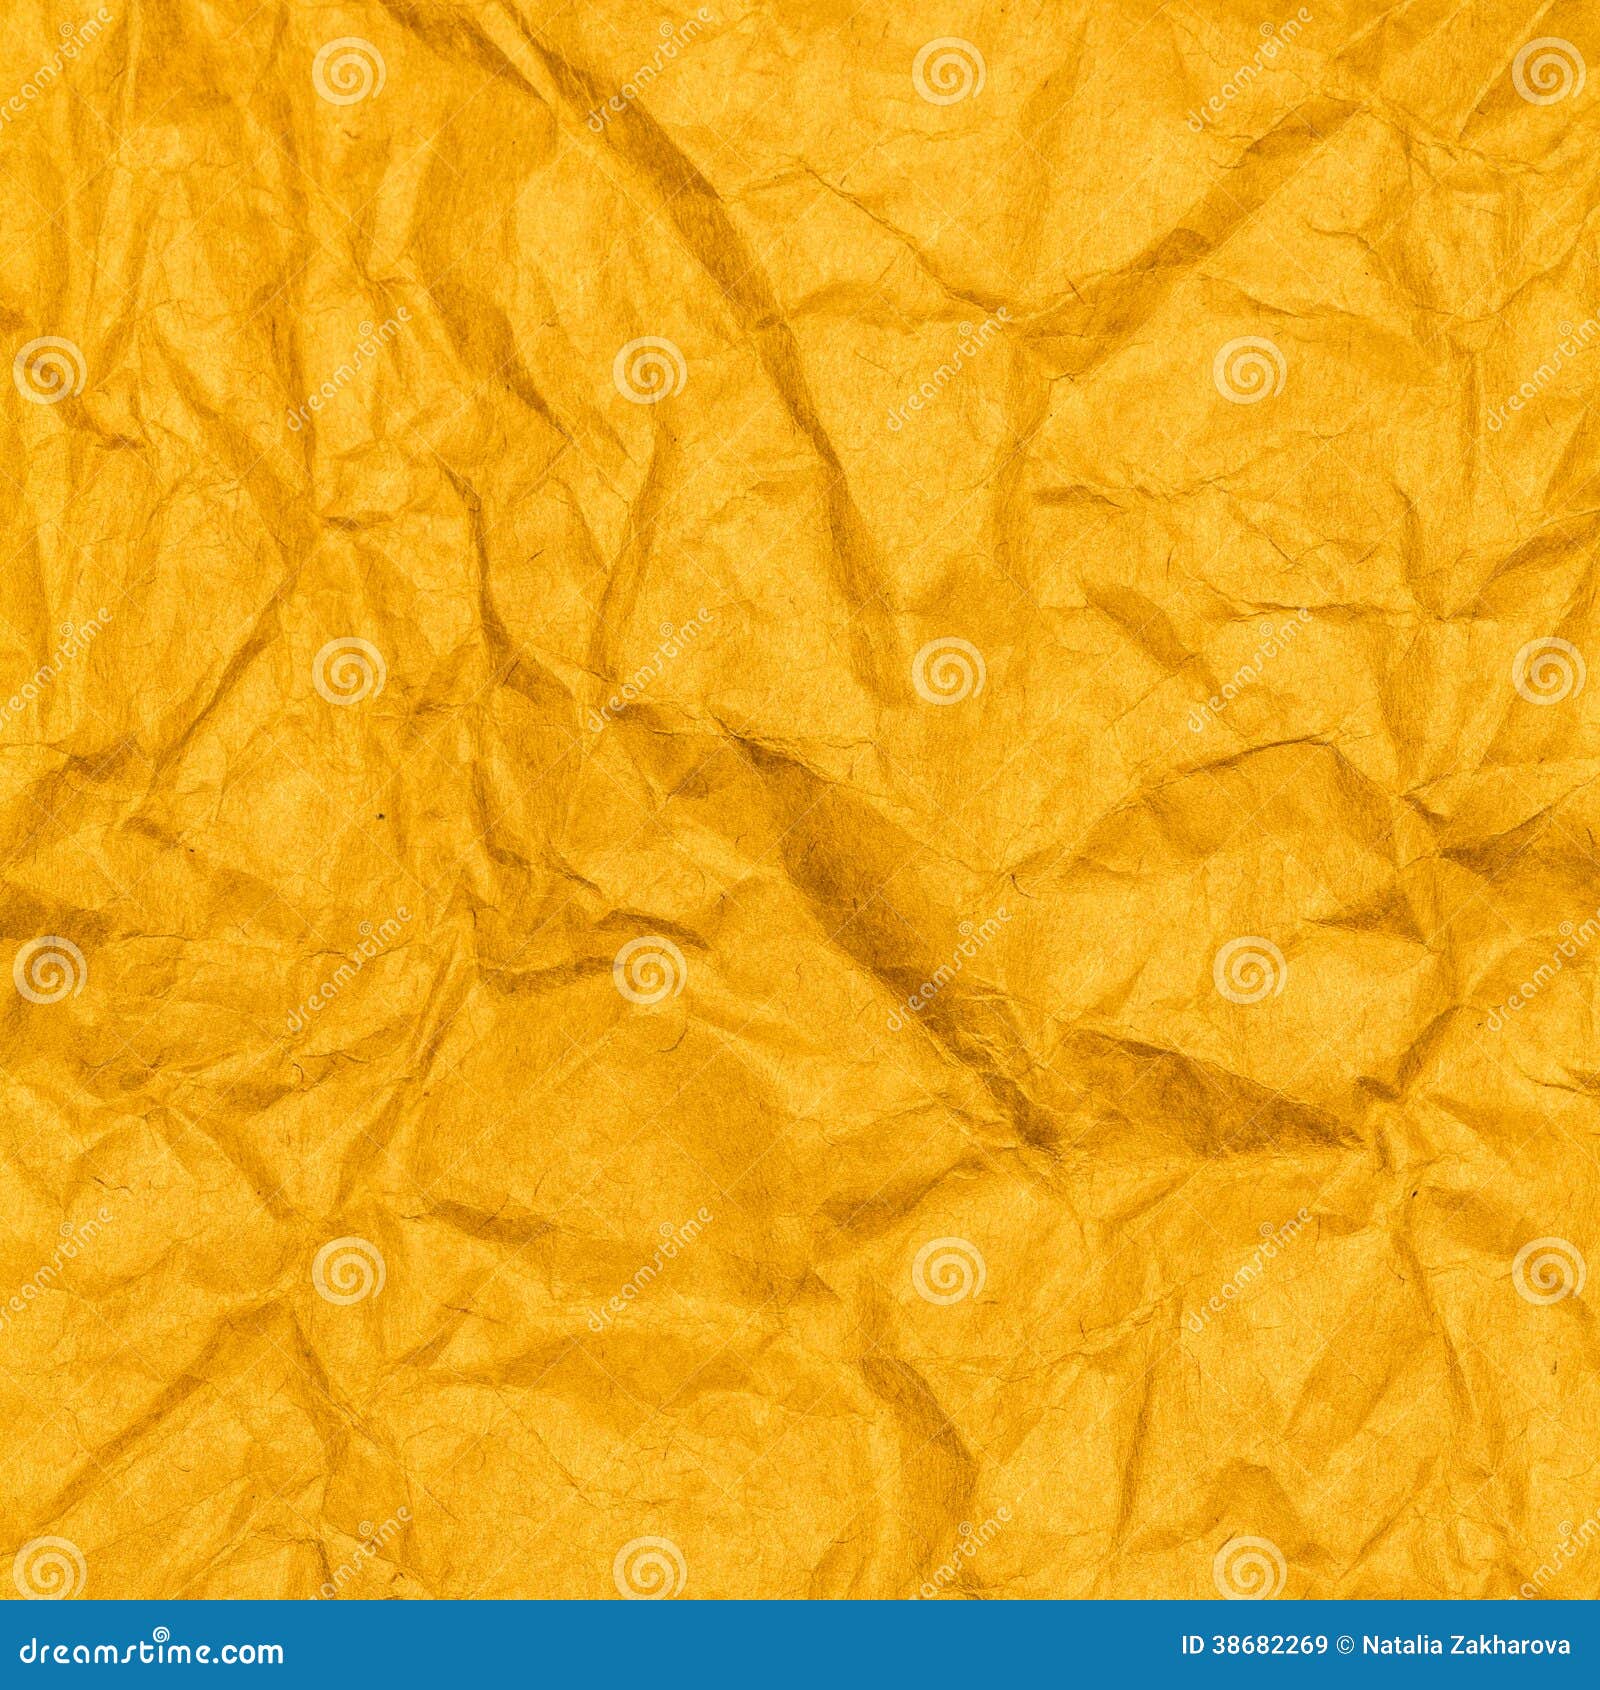 Crumpled Yellow Paper Texture Background. Stock Image - Image of